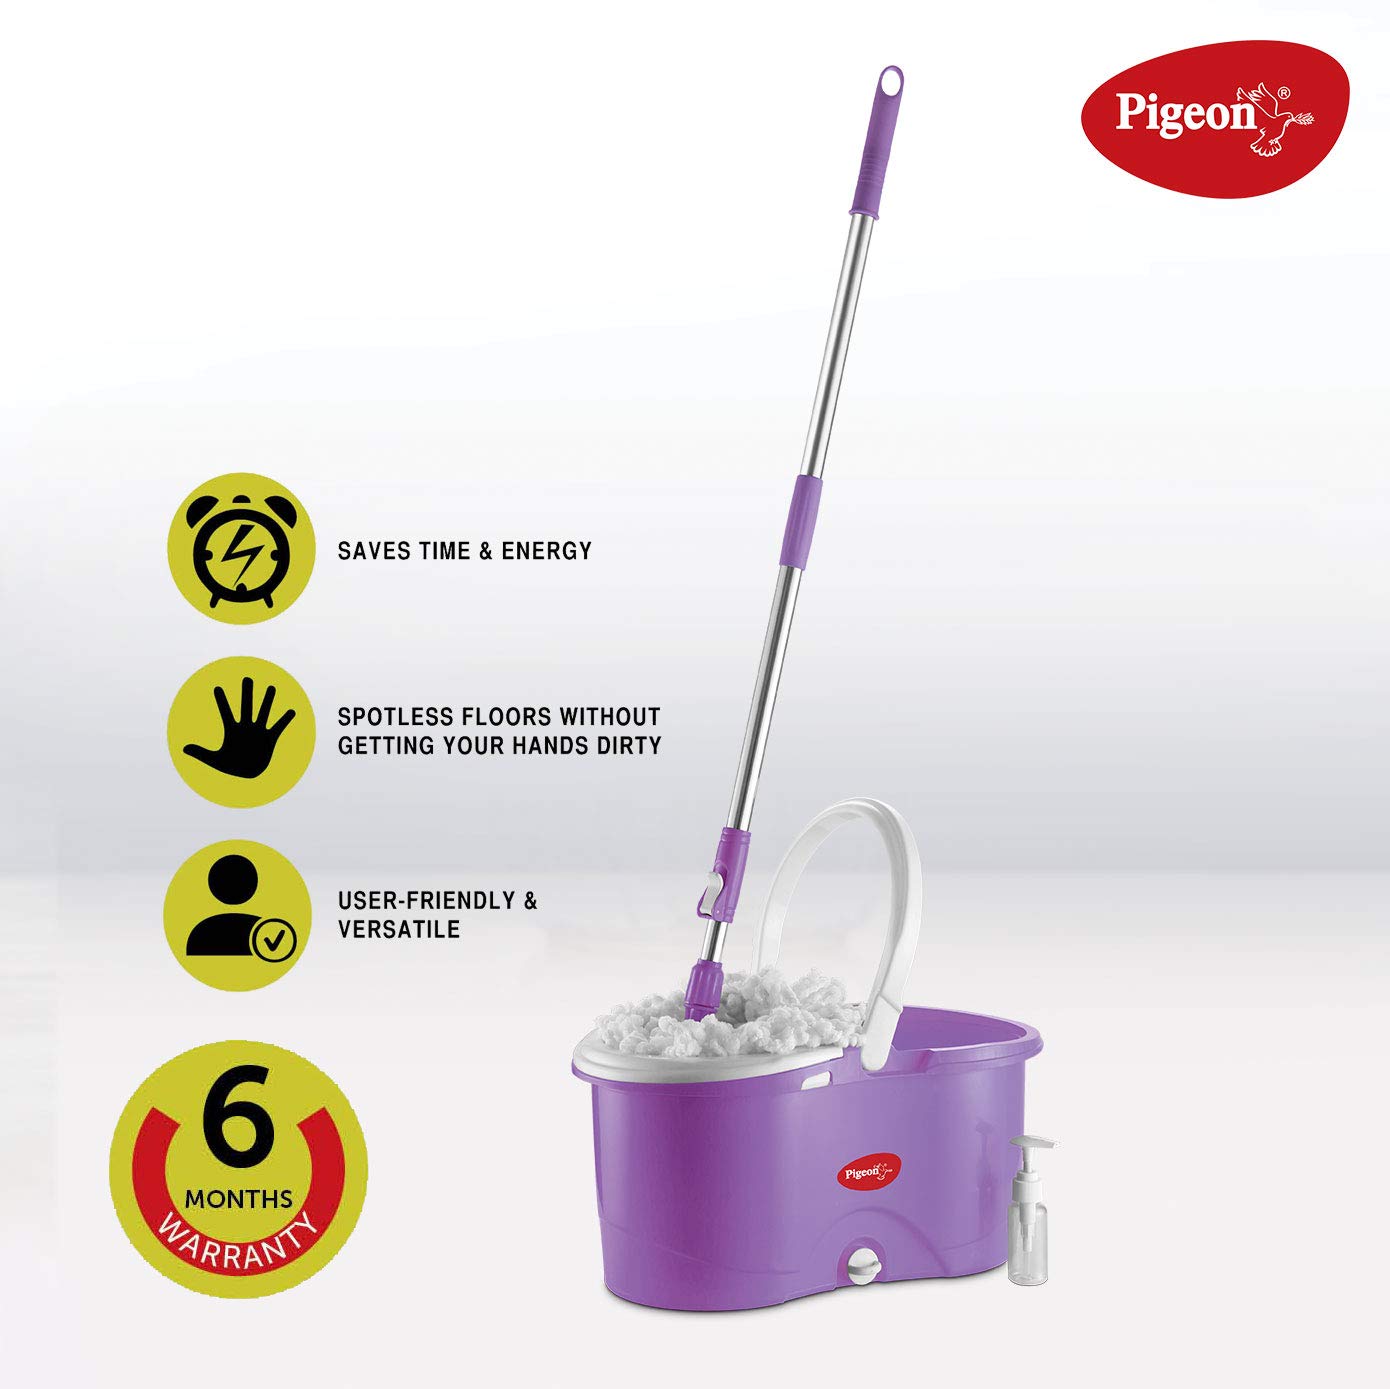 Pigeon Enjoy Spin Mop with 360 Degree Rotating PVC Magic Mop Set for Wet and Dry Floor/Wall (Lavender, 2 refills), large (12458B)